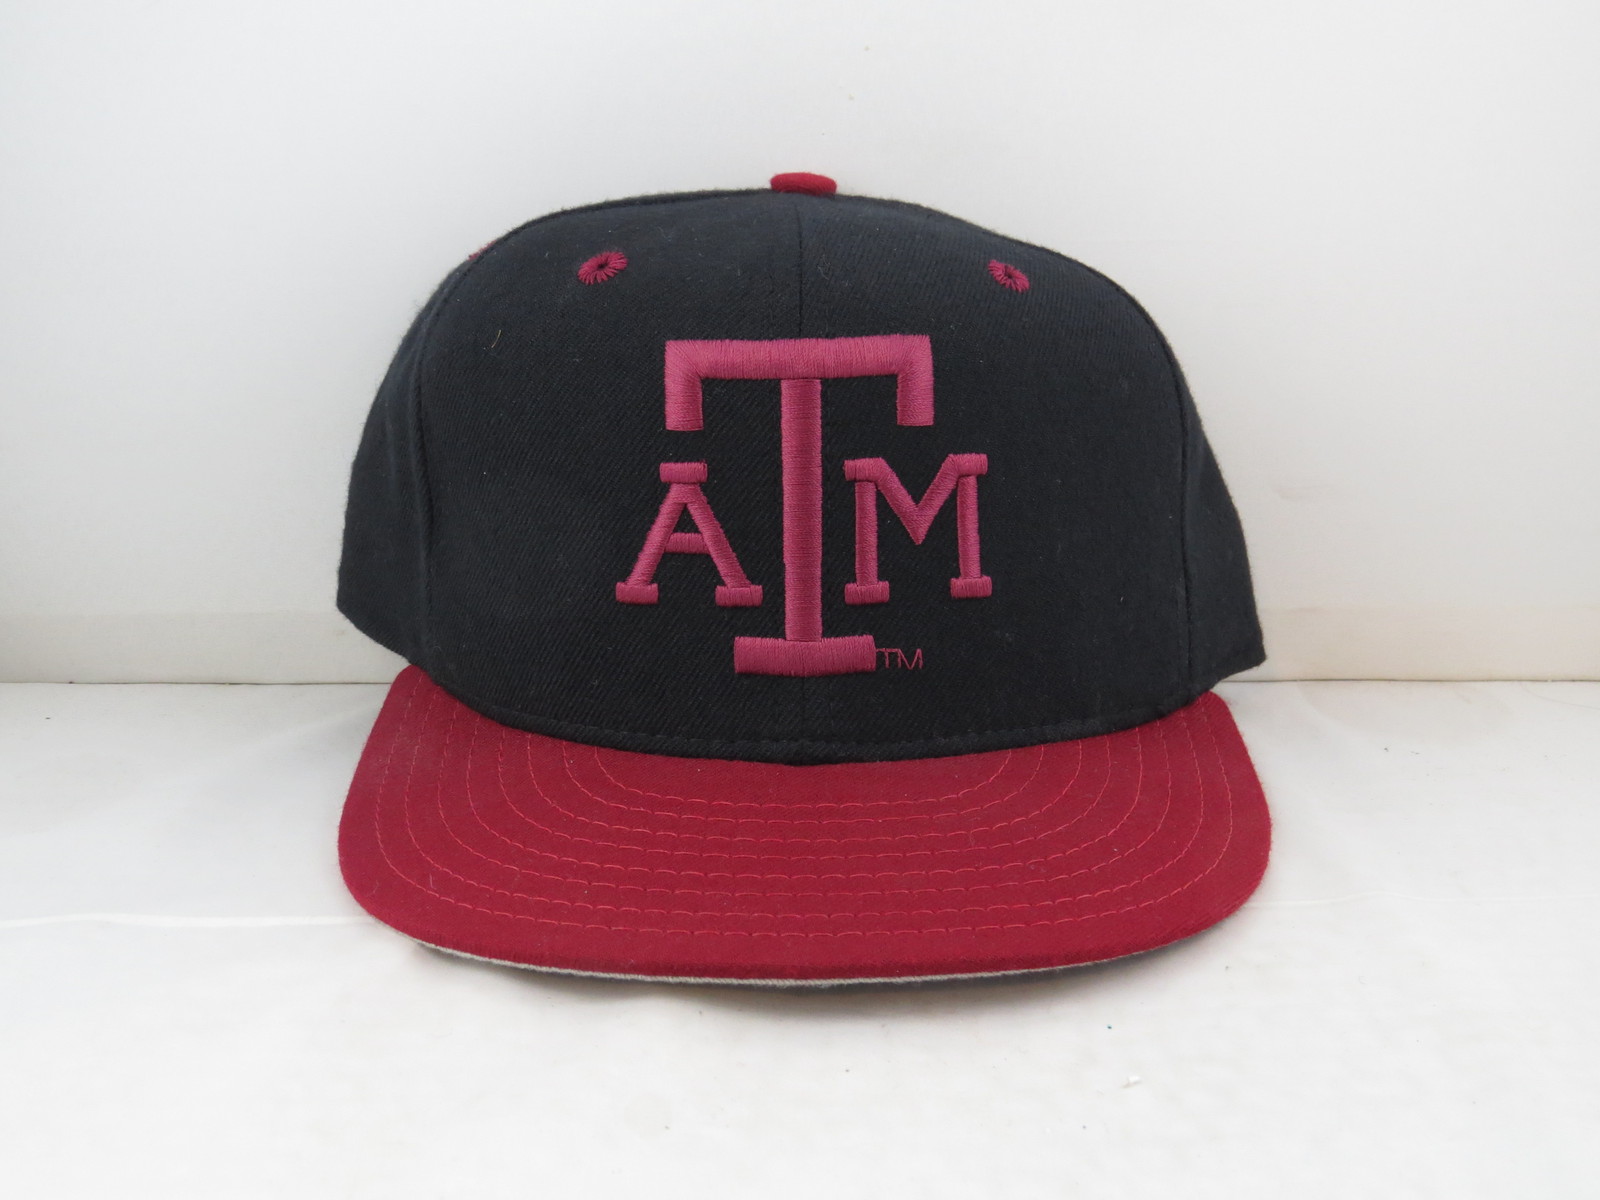 Texas A&M Aggies Hat (VTG) - 1990s Baseball Pro Model by New Era - Fitted 7 1/2 - $55.00